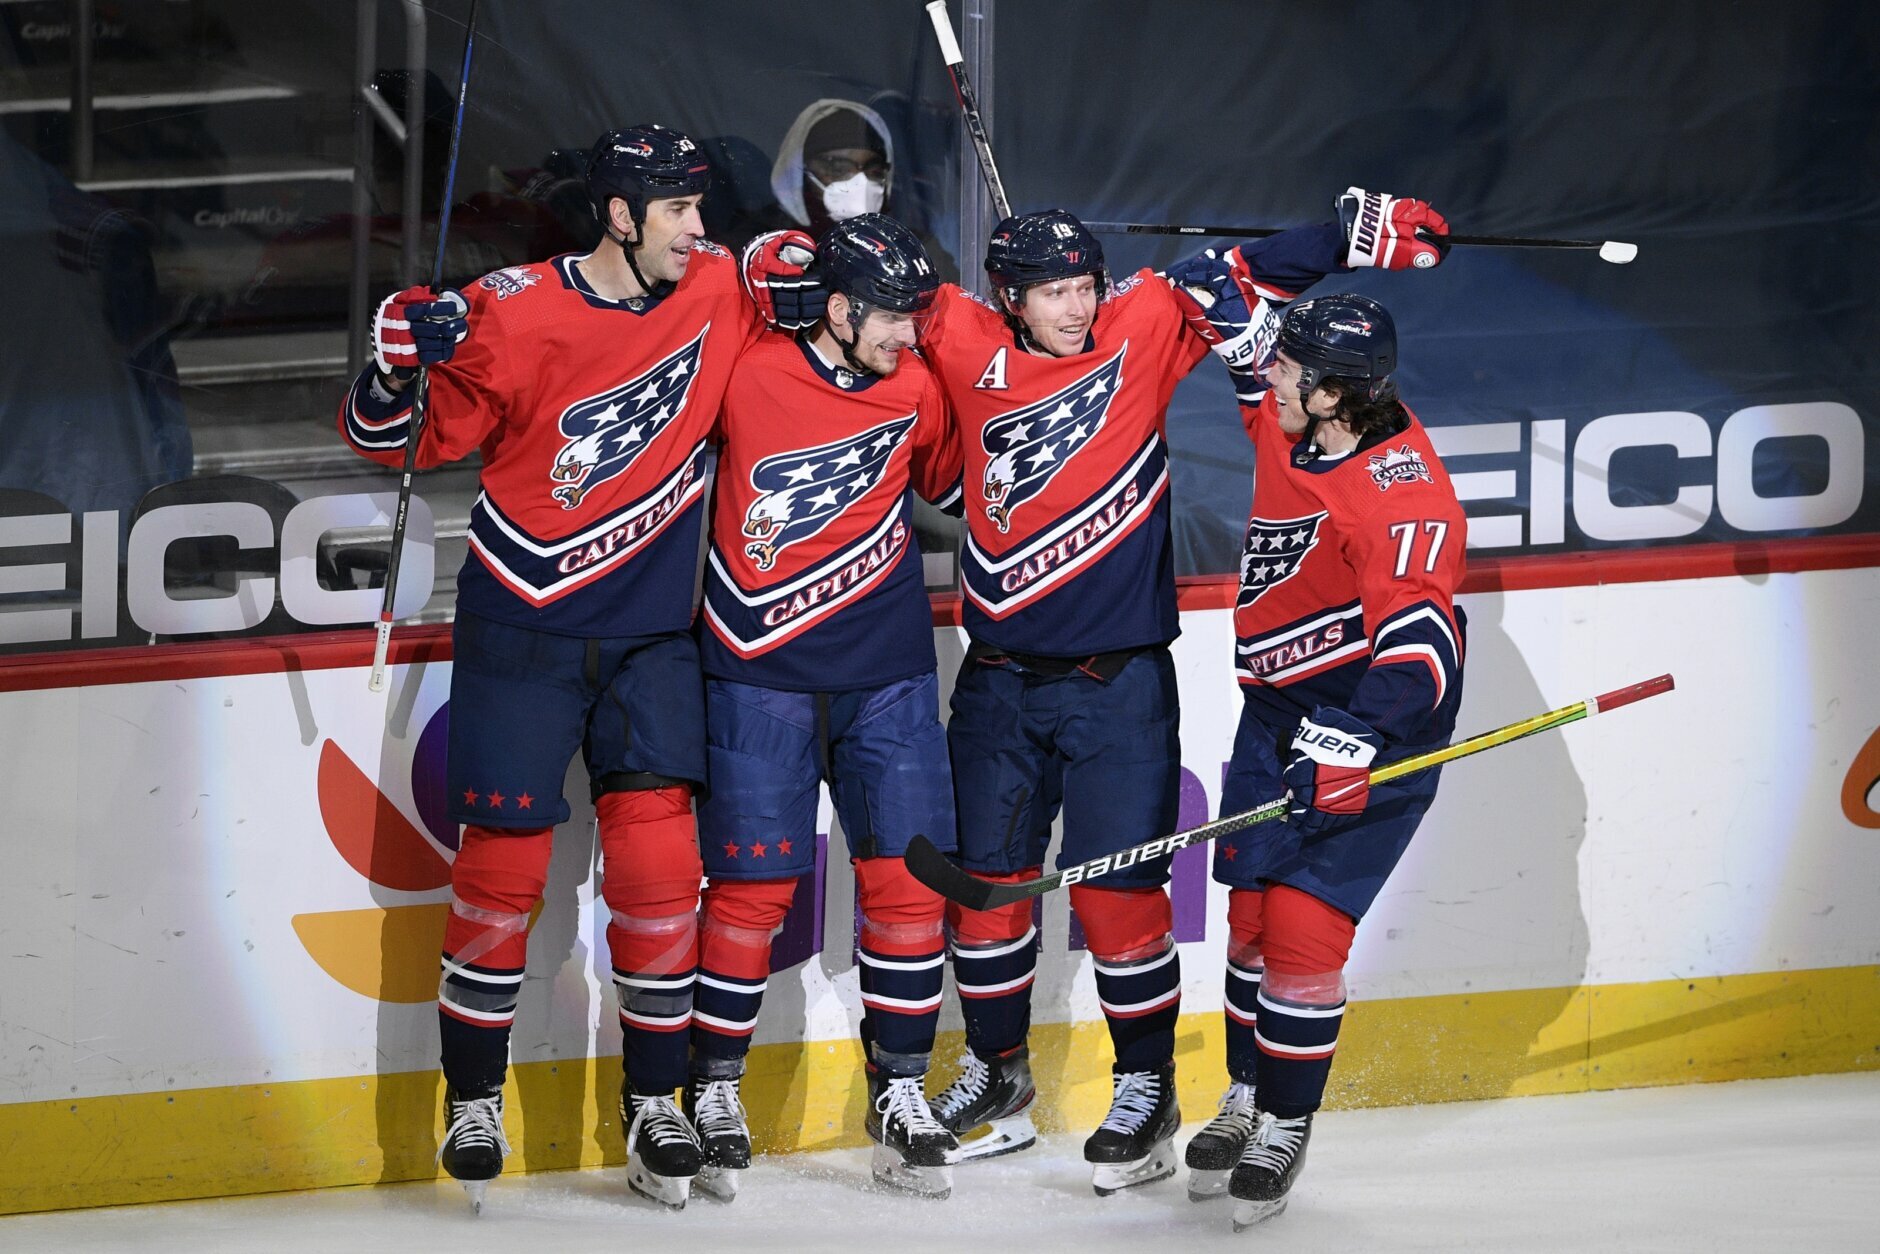 Washington Capitals right wing Richard Panik, second from the left, celebrates his goal with defenseman Zdeno Chara (33), center Nicklas Backstrom (19) and right wing T.J. Oshie (77) during the second period of an NHL hockey game against the Pittsburgh Penguins, Tuesday, Feb. 23, 2021, in Washington. (AP Photo/Nick Wass)